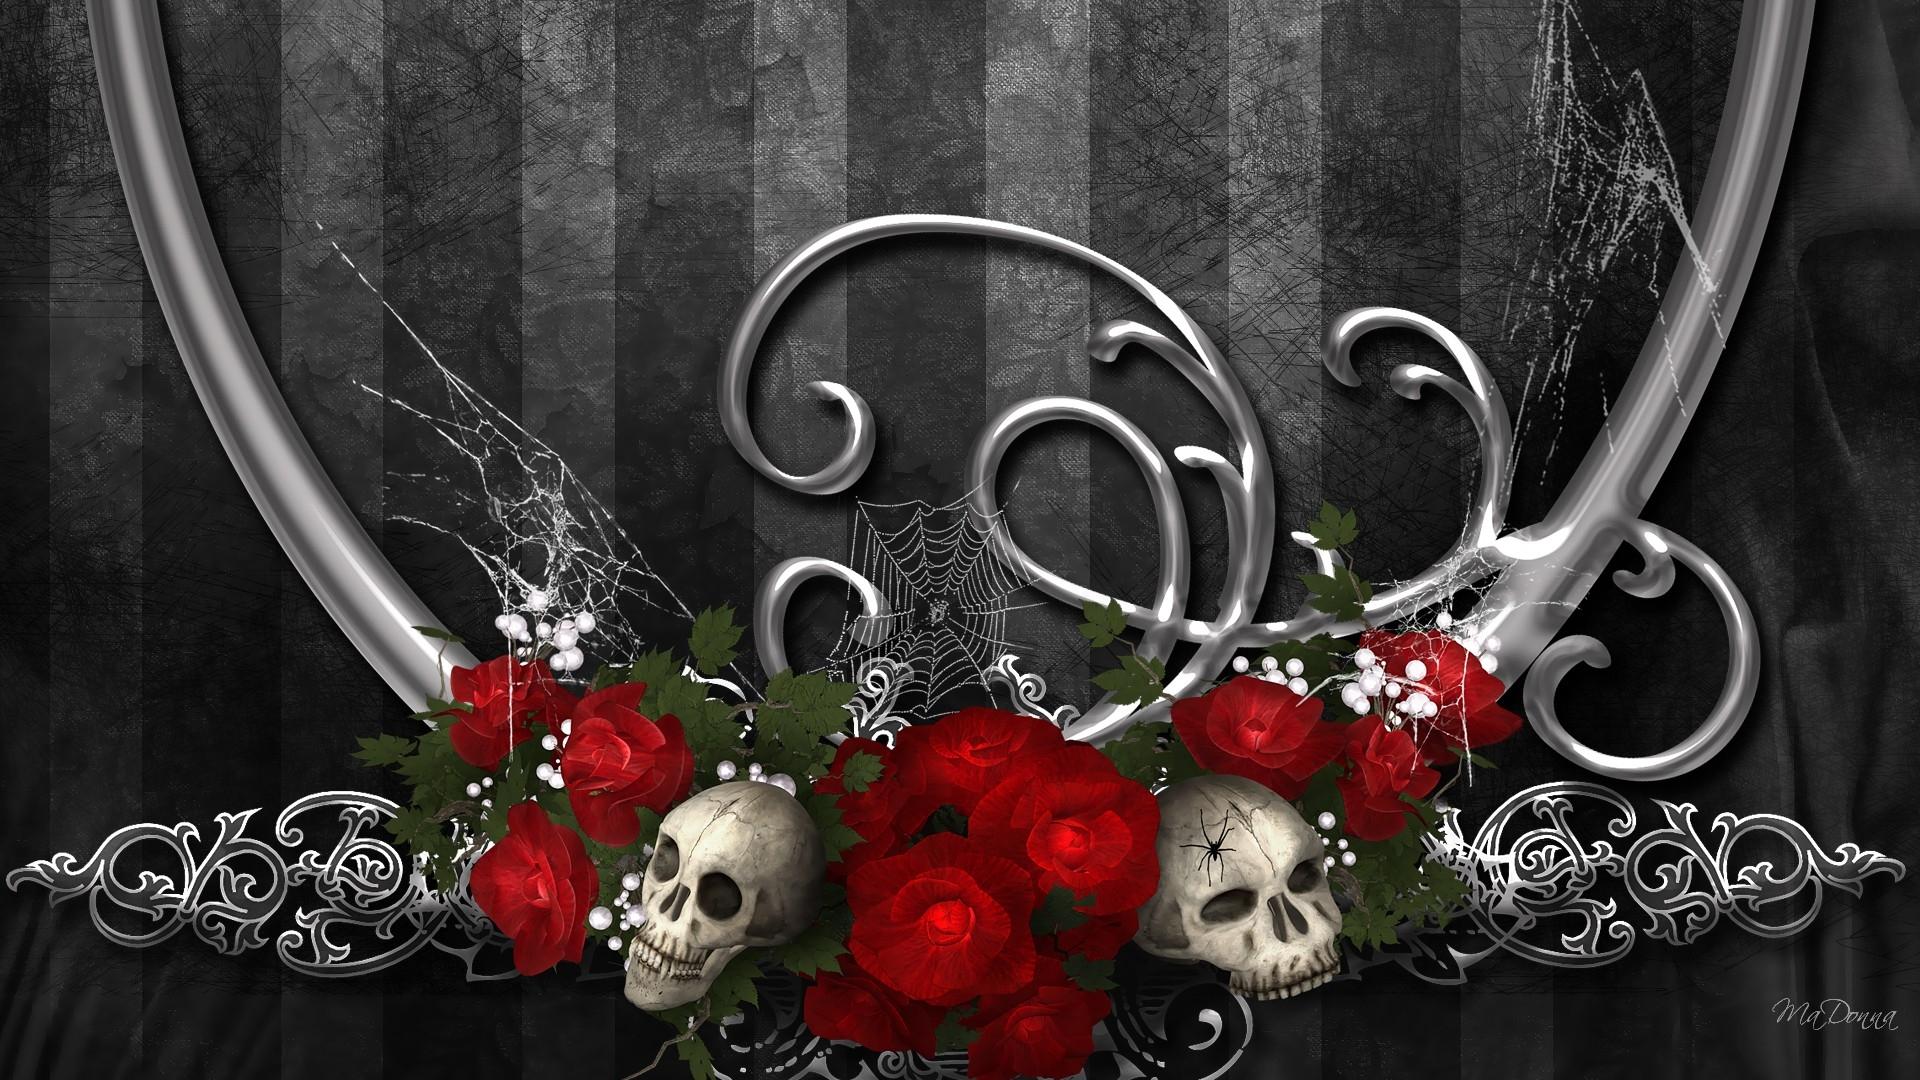 Gothic Roses by MaDonna